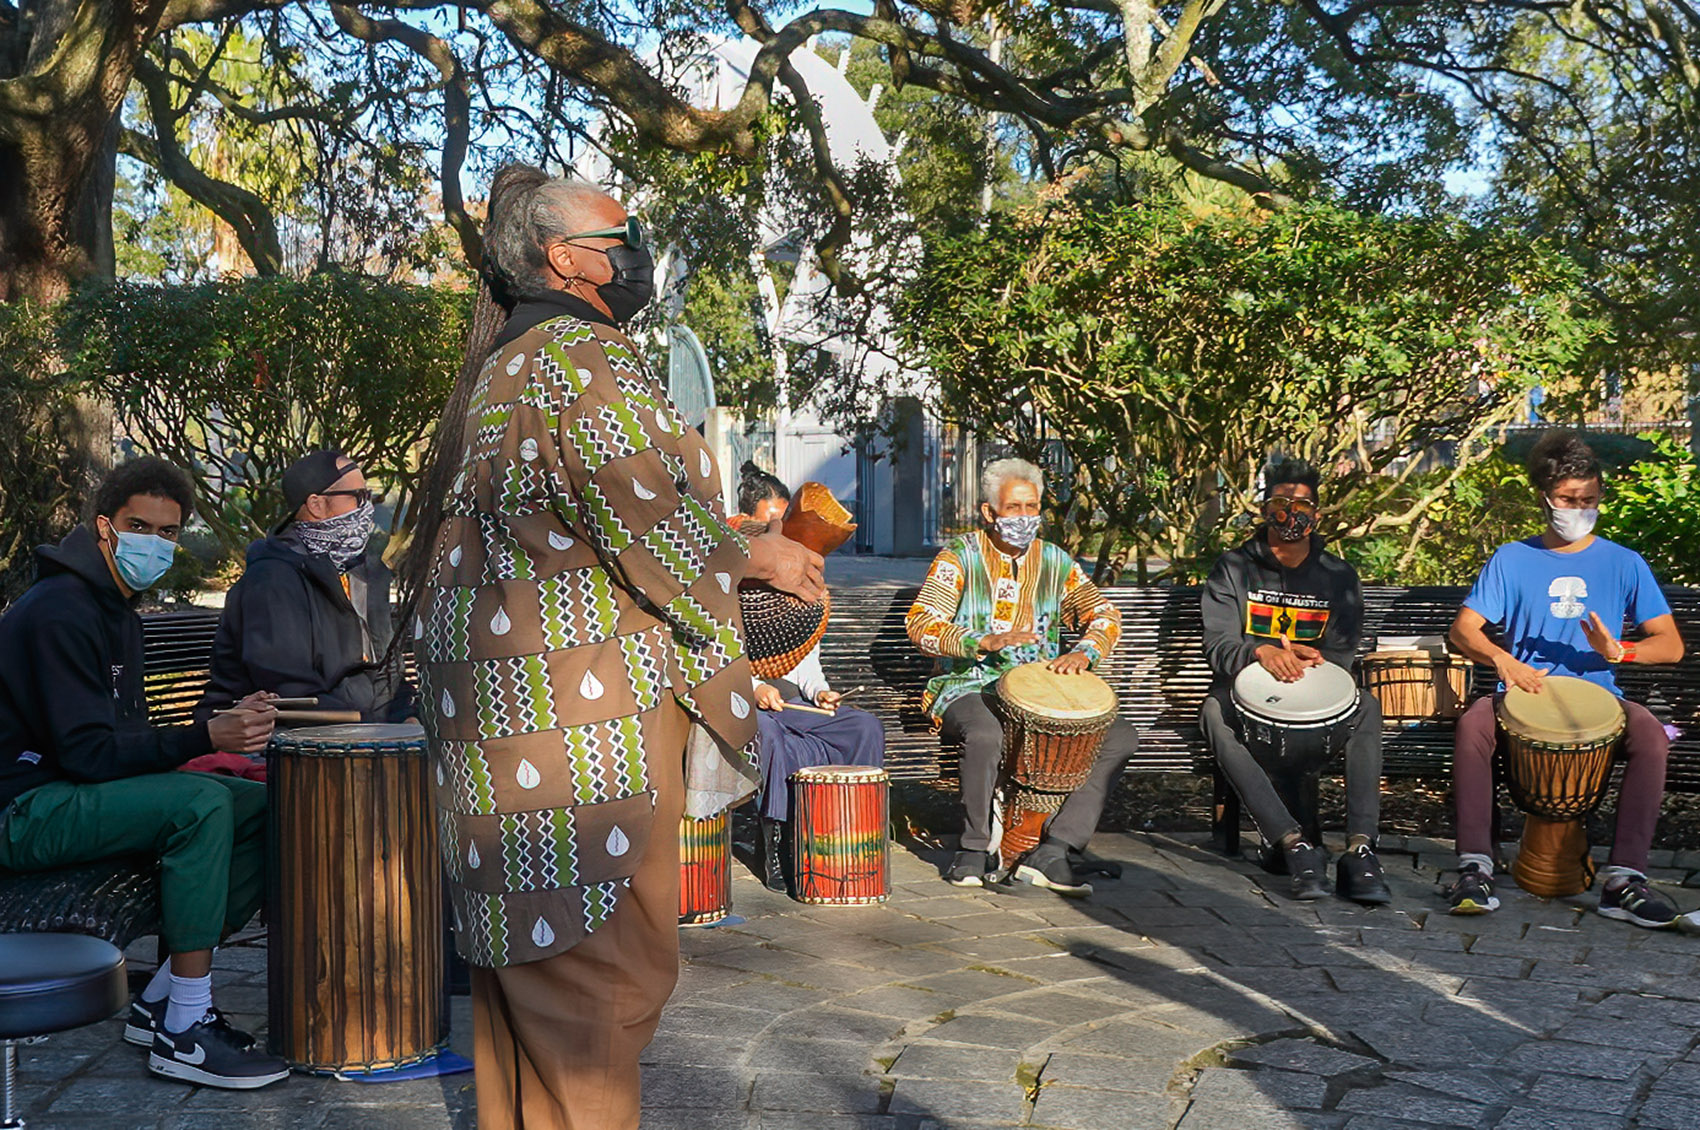 people sitting on bench playing congo drums in congo square in New Orleans